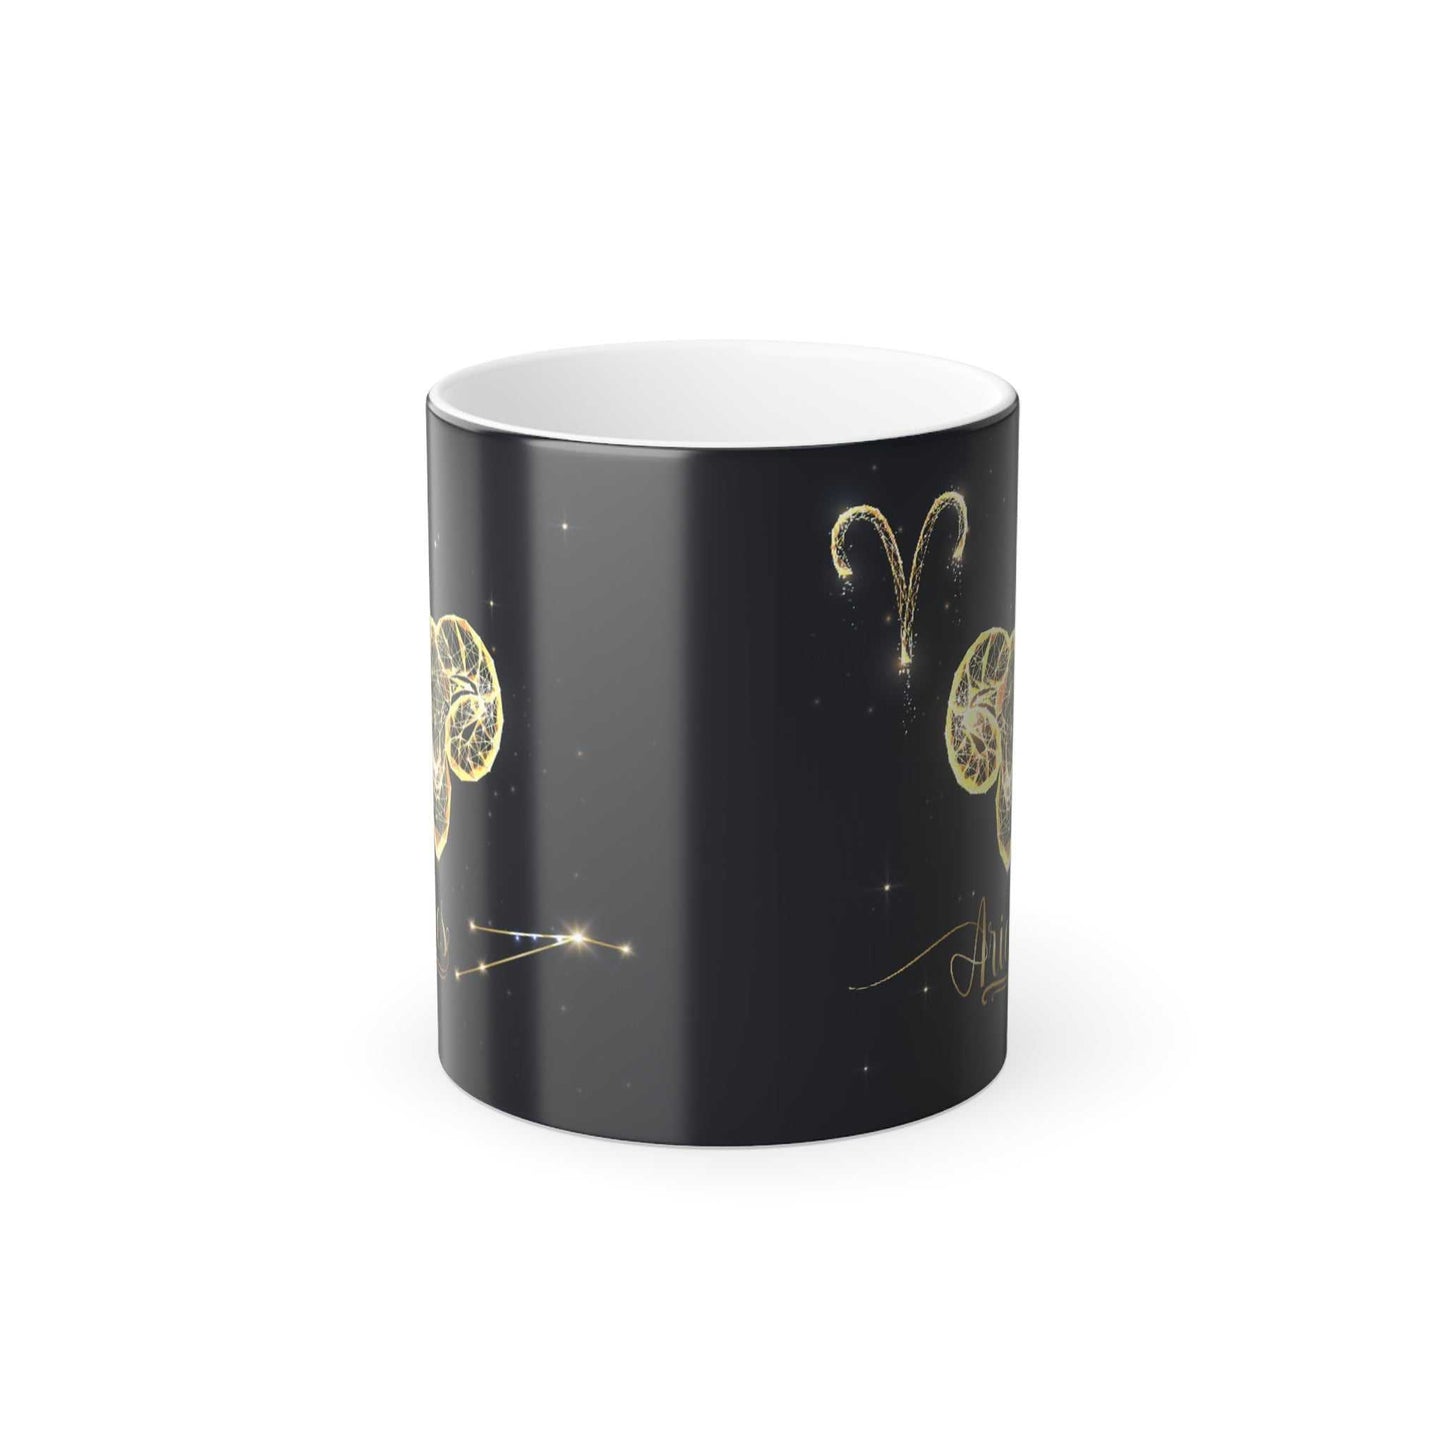 Aries Zodiac Coffee Mugs with Color Morphing   11 oz.Color Morphing Aries Zodiac 11 oz